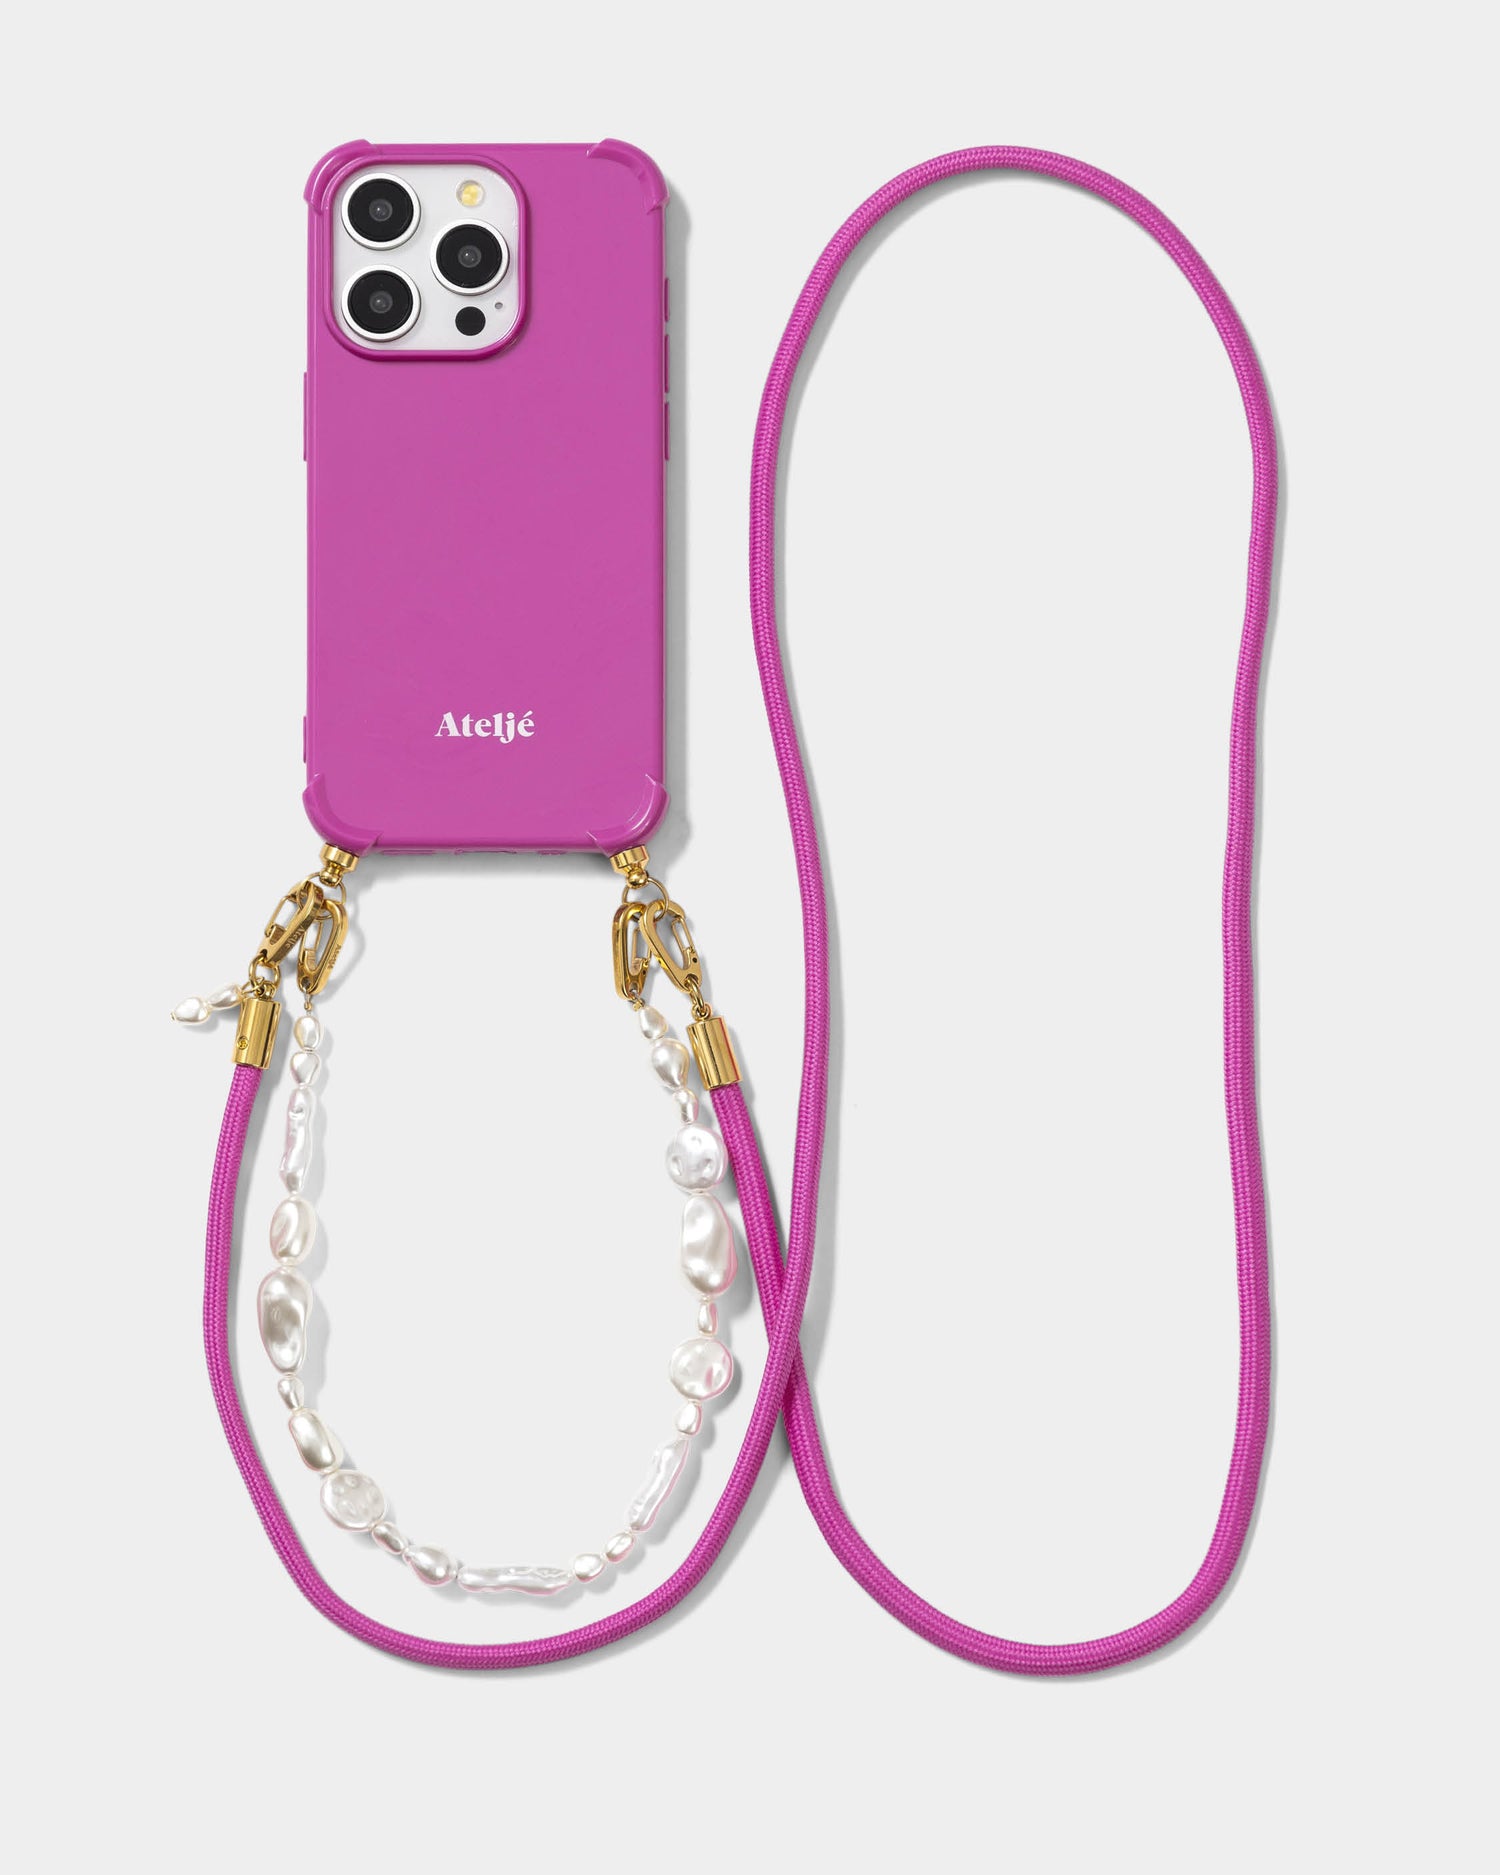 Poppy Pink case with Beach Walk and Spice cords